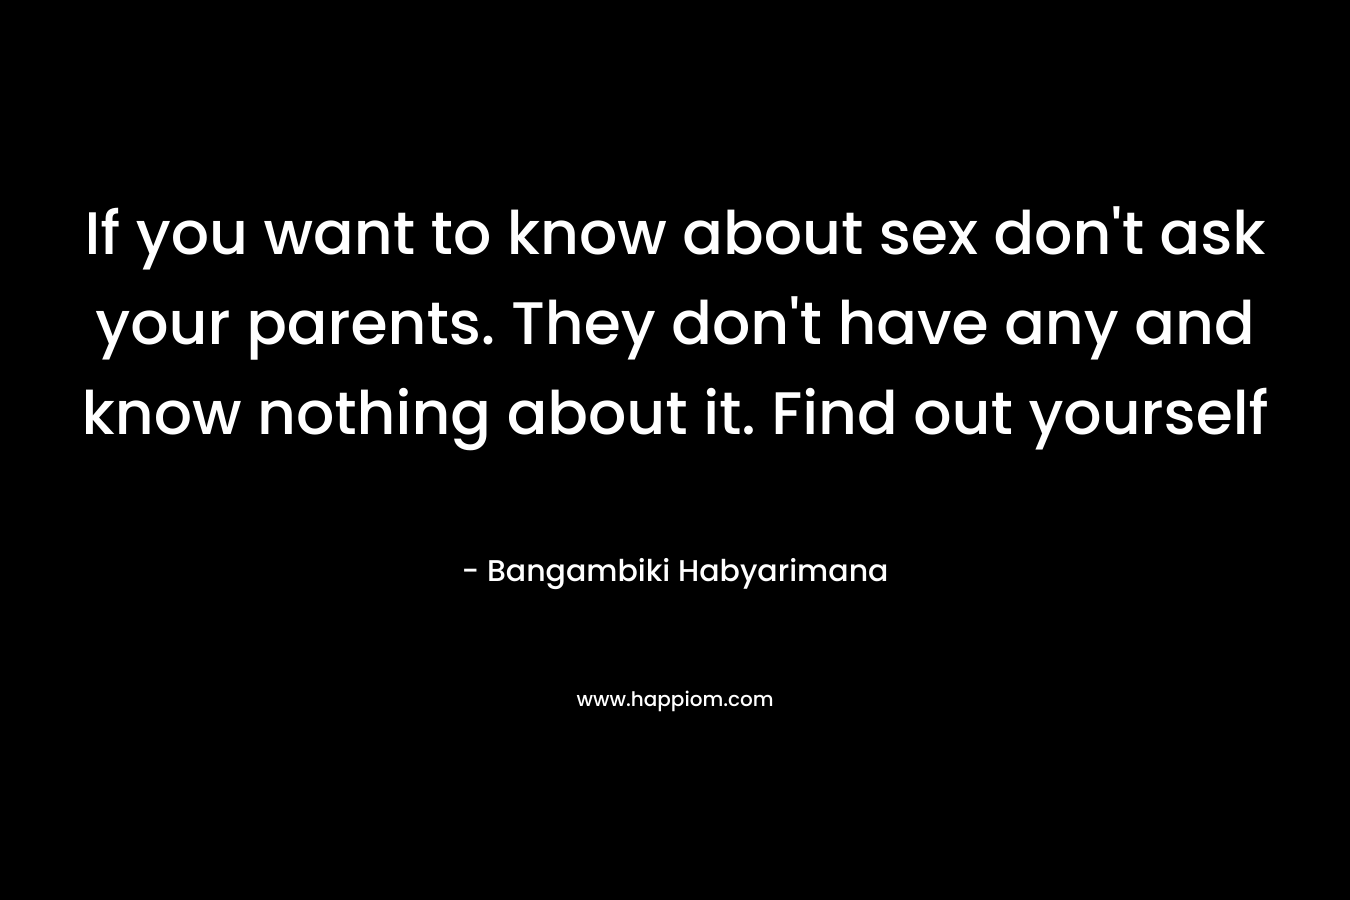 If you want to know about sex don't ask your parents. They don't have any and know nothing about it. Find out yourself